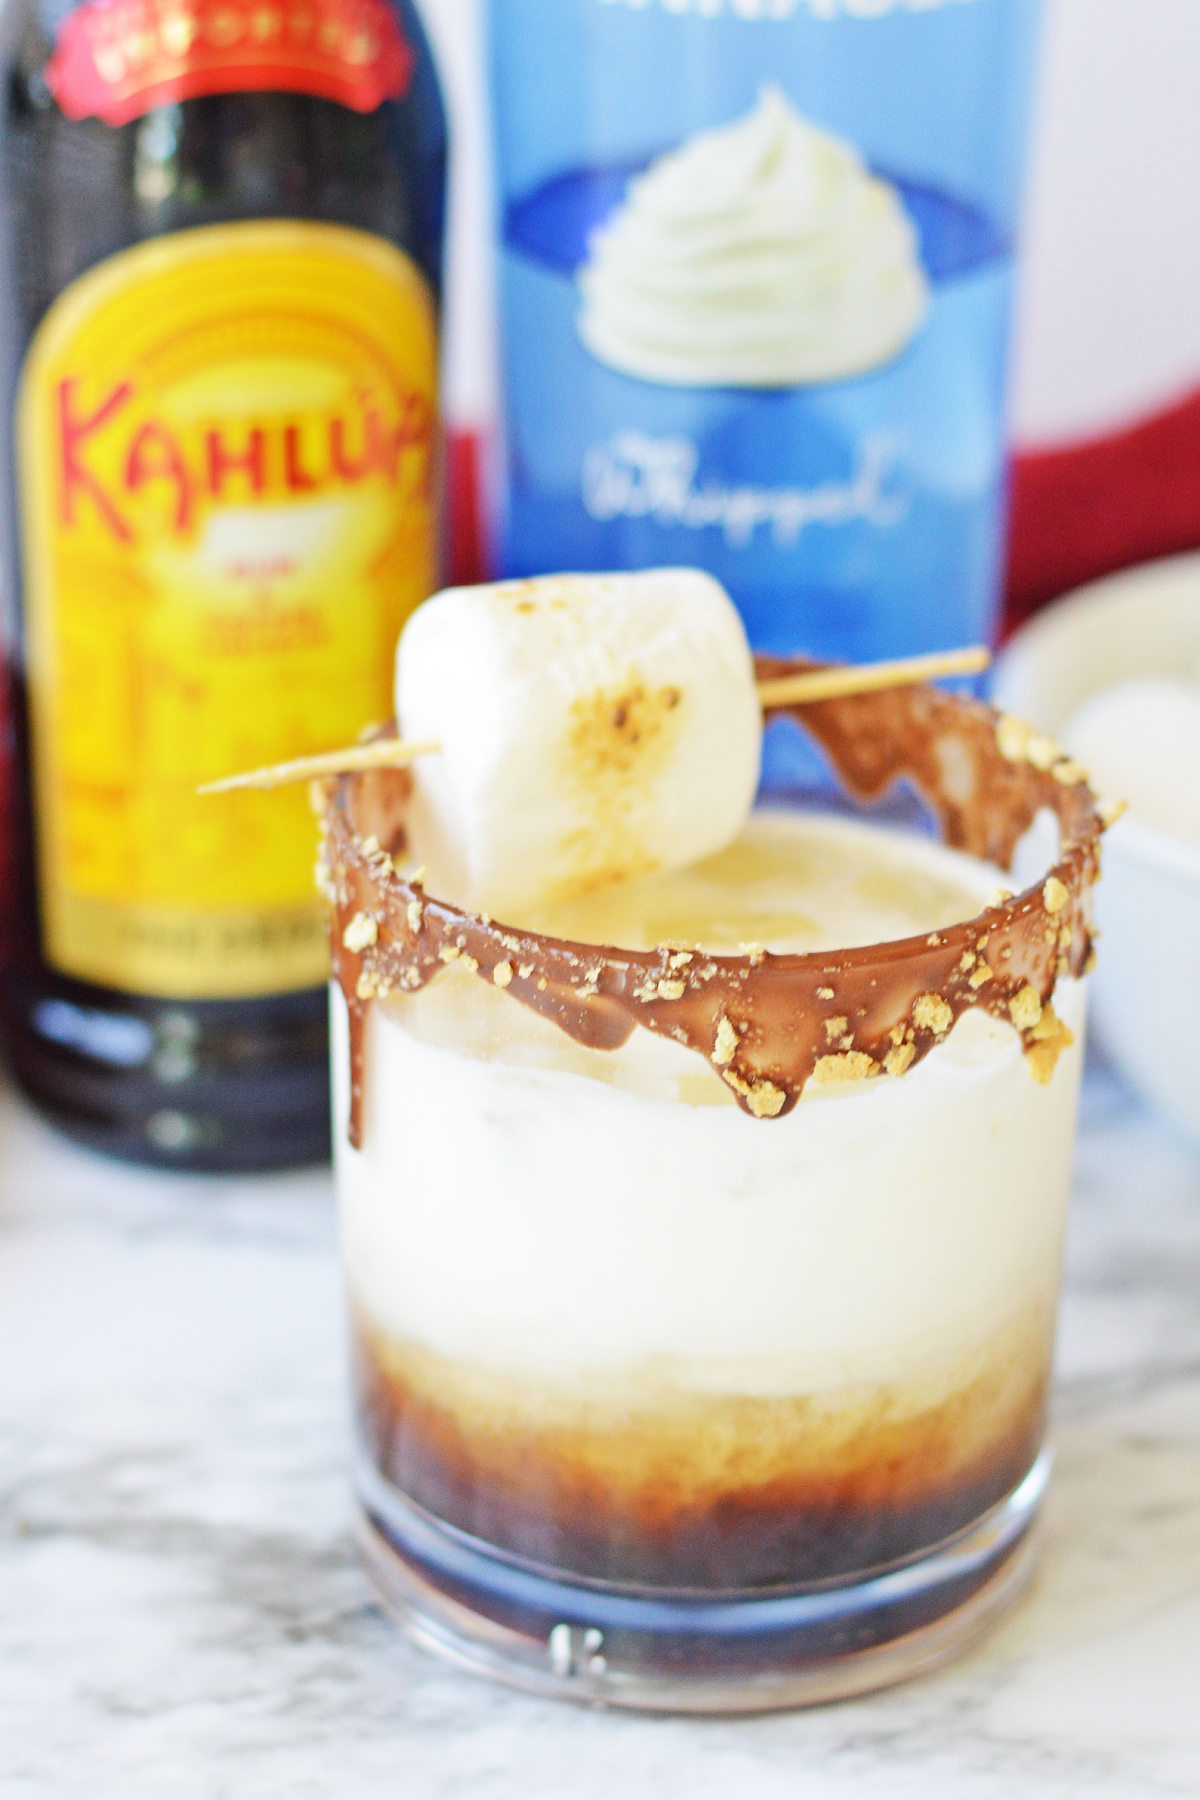 Smore's cocktail with kahlua